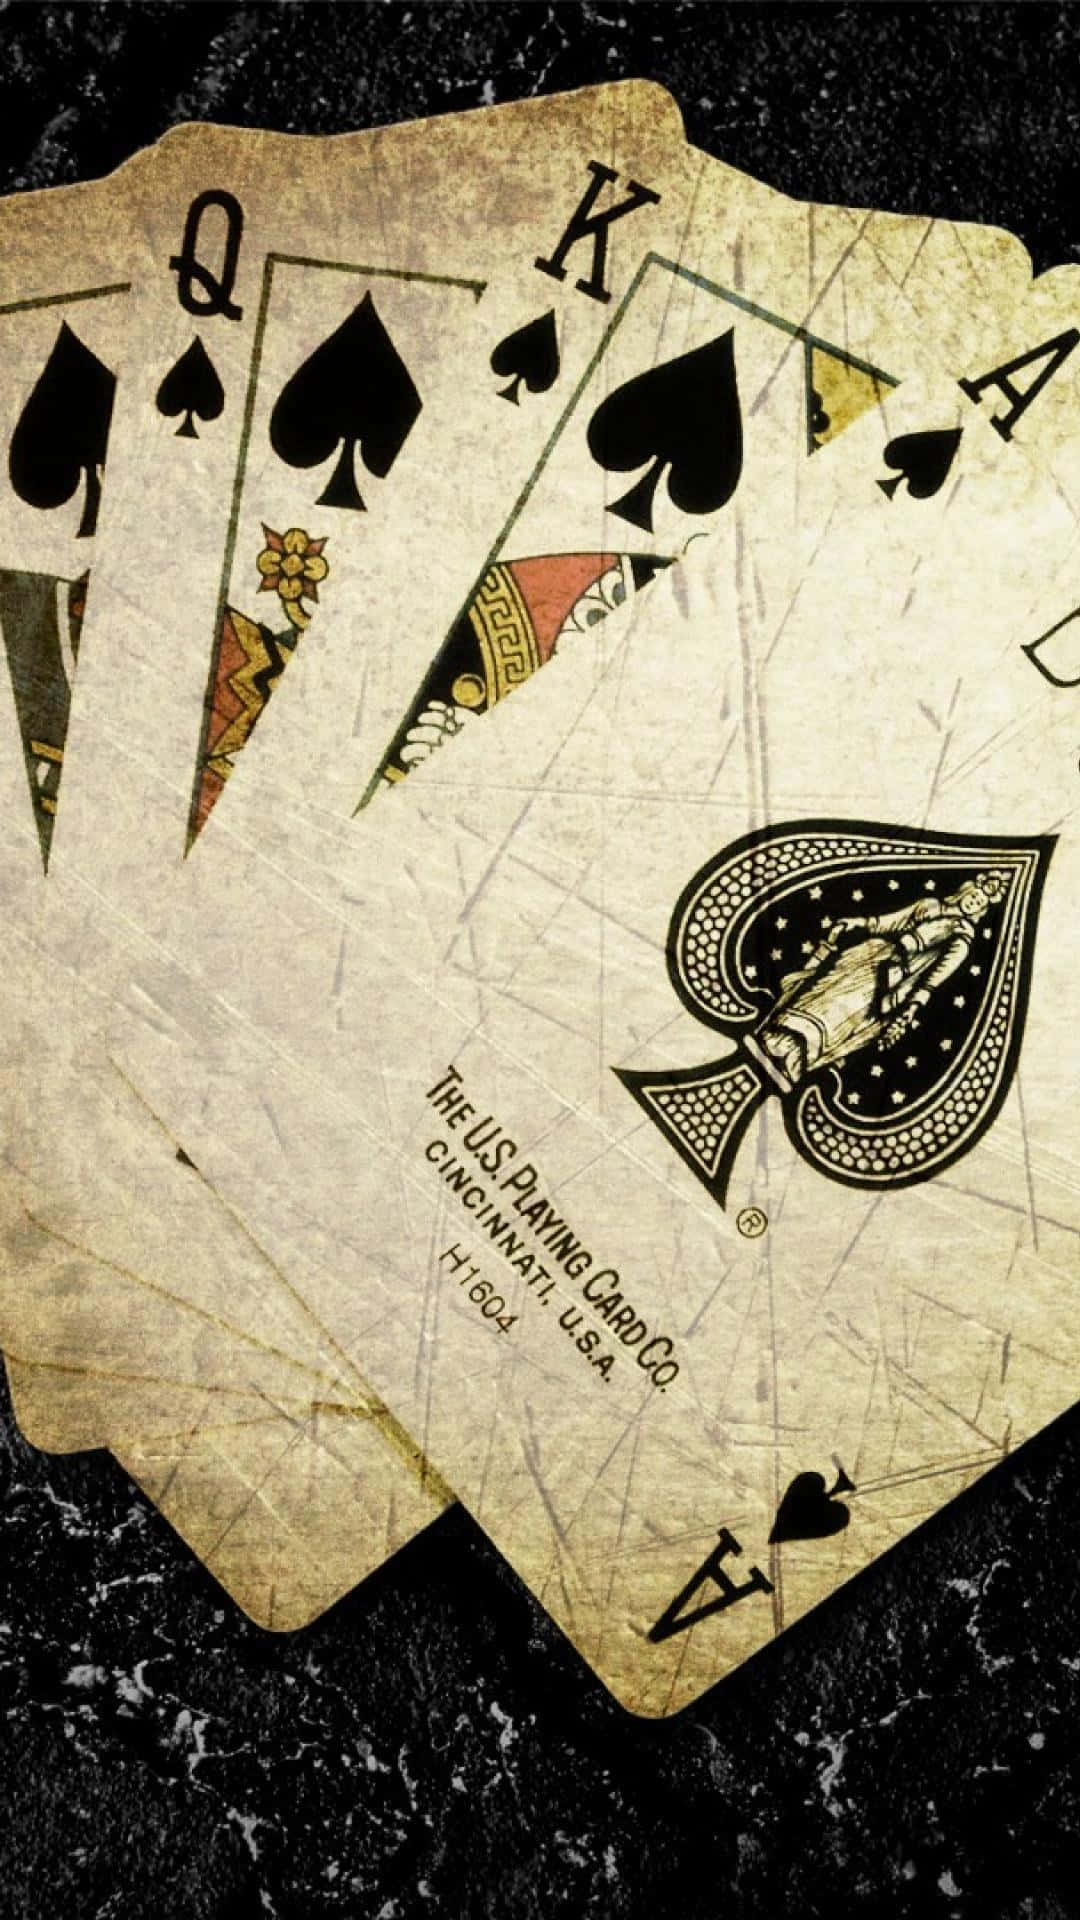 A Set Of Playing Cards On A Black Surface